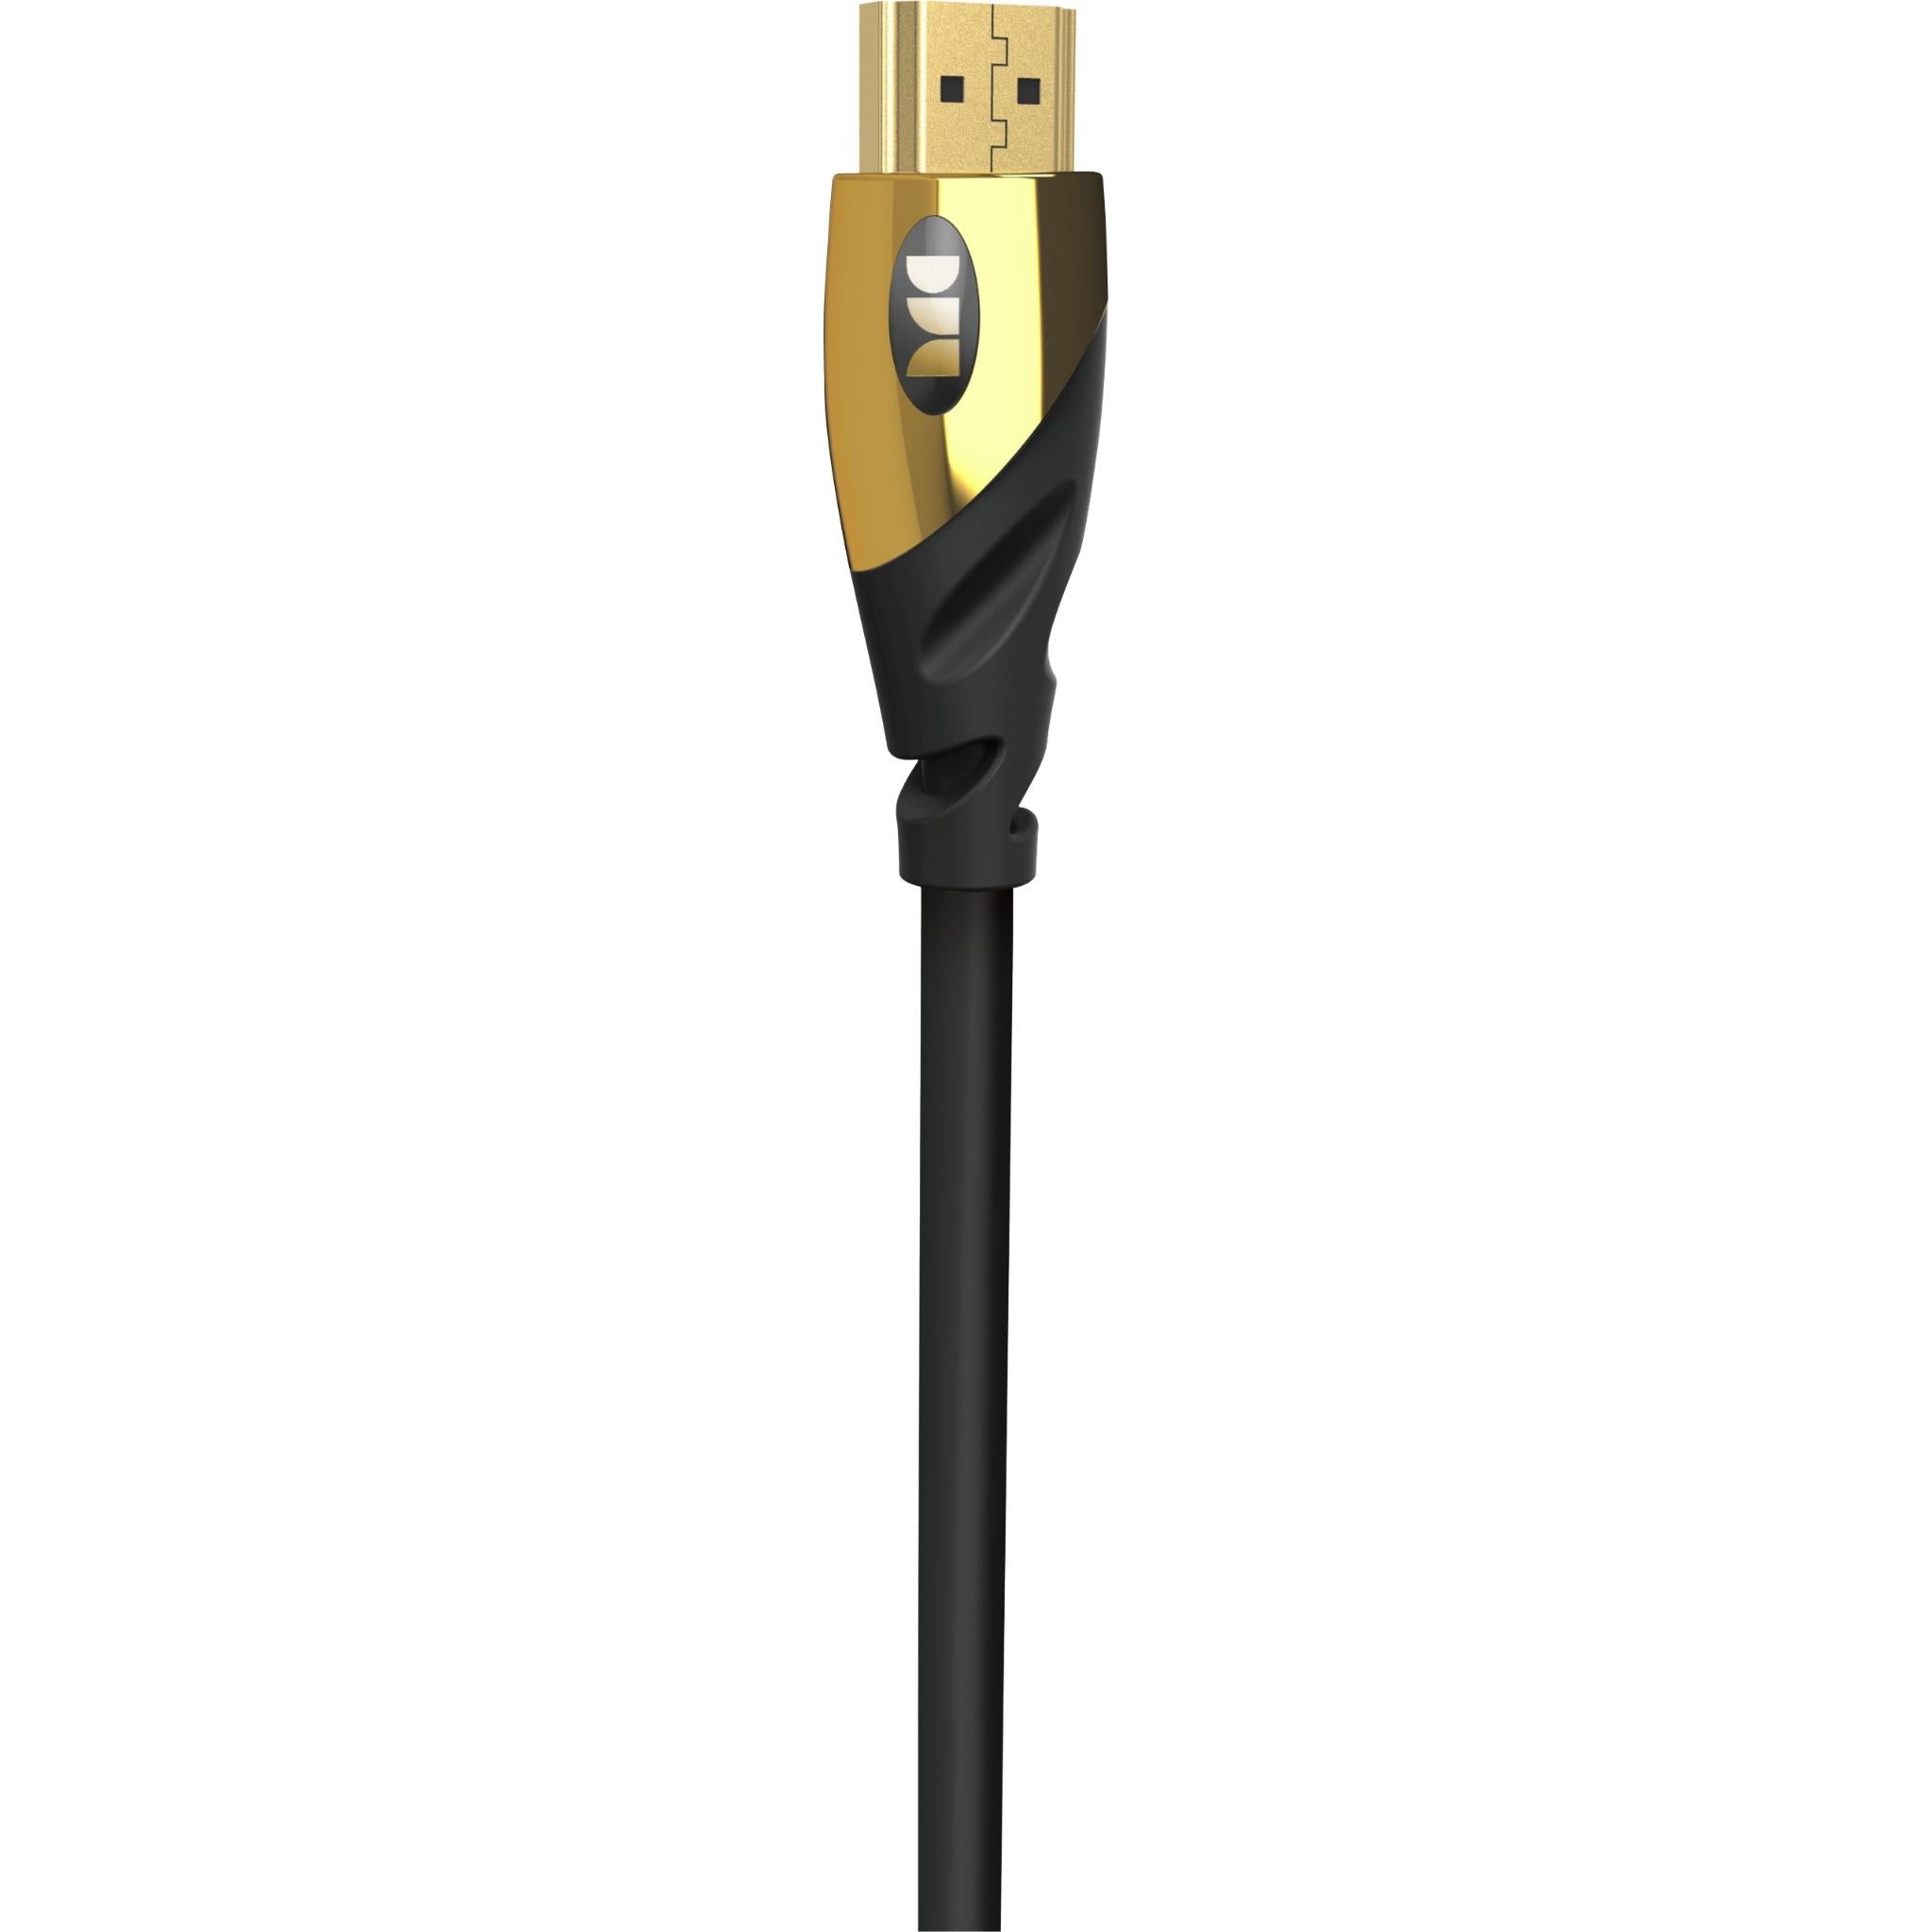 5m HDMI Cable 4K High Speed with Ethernet